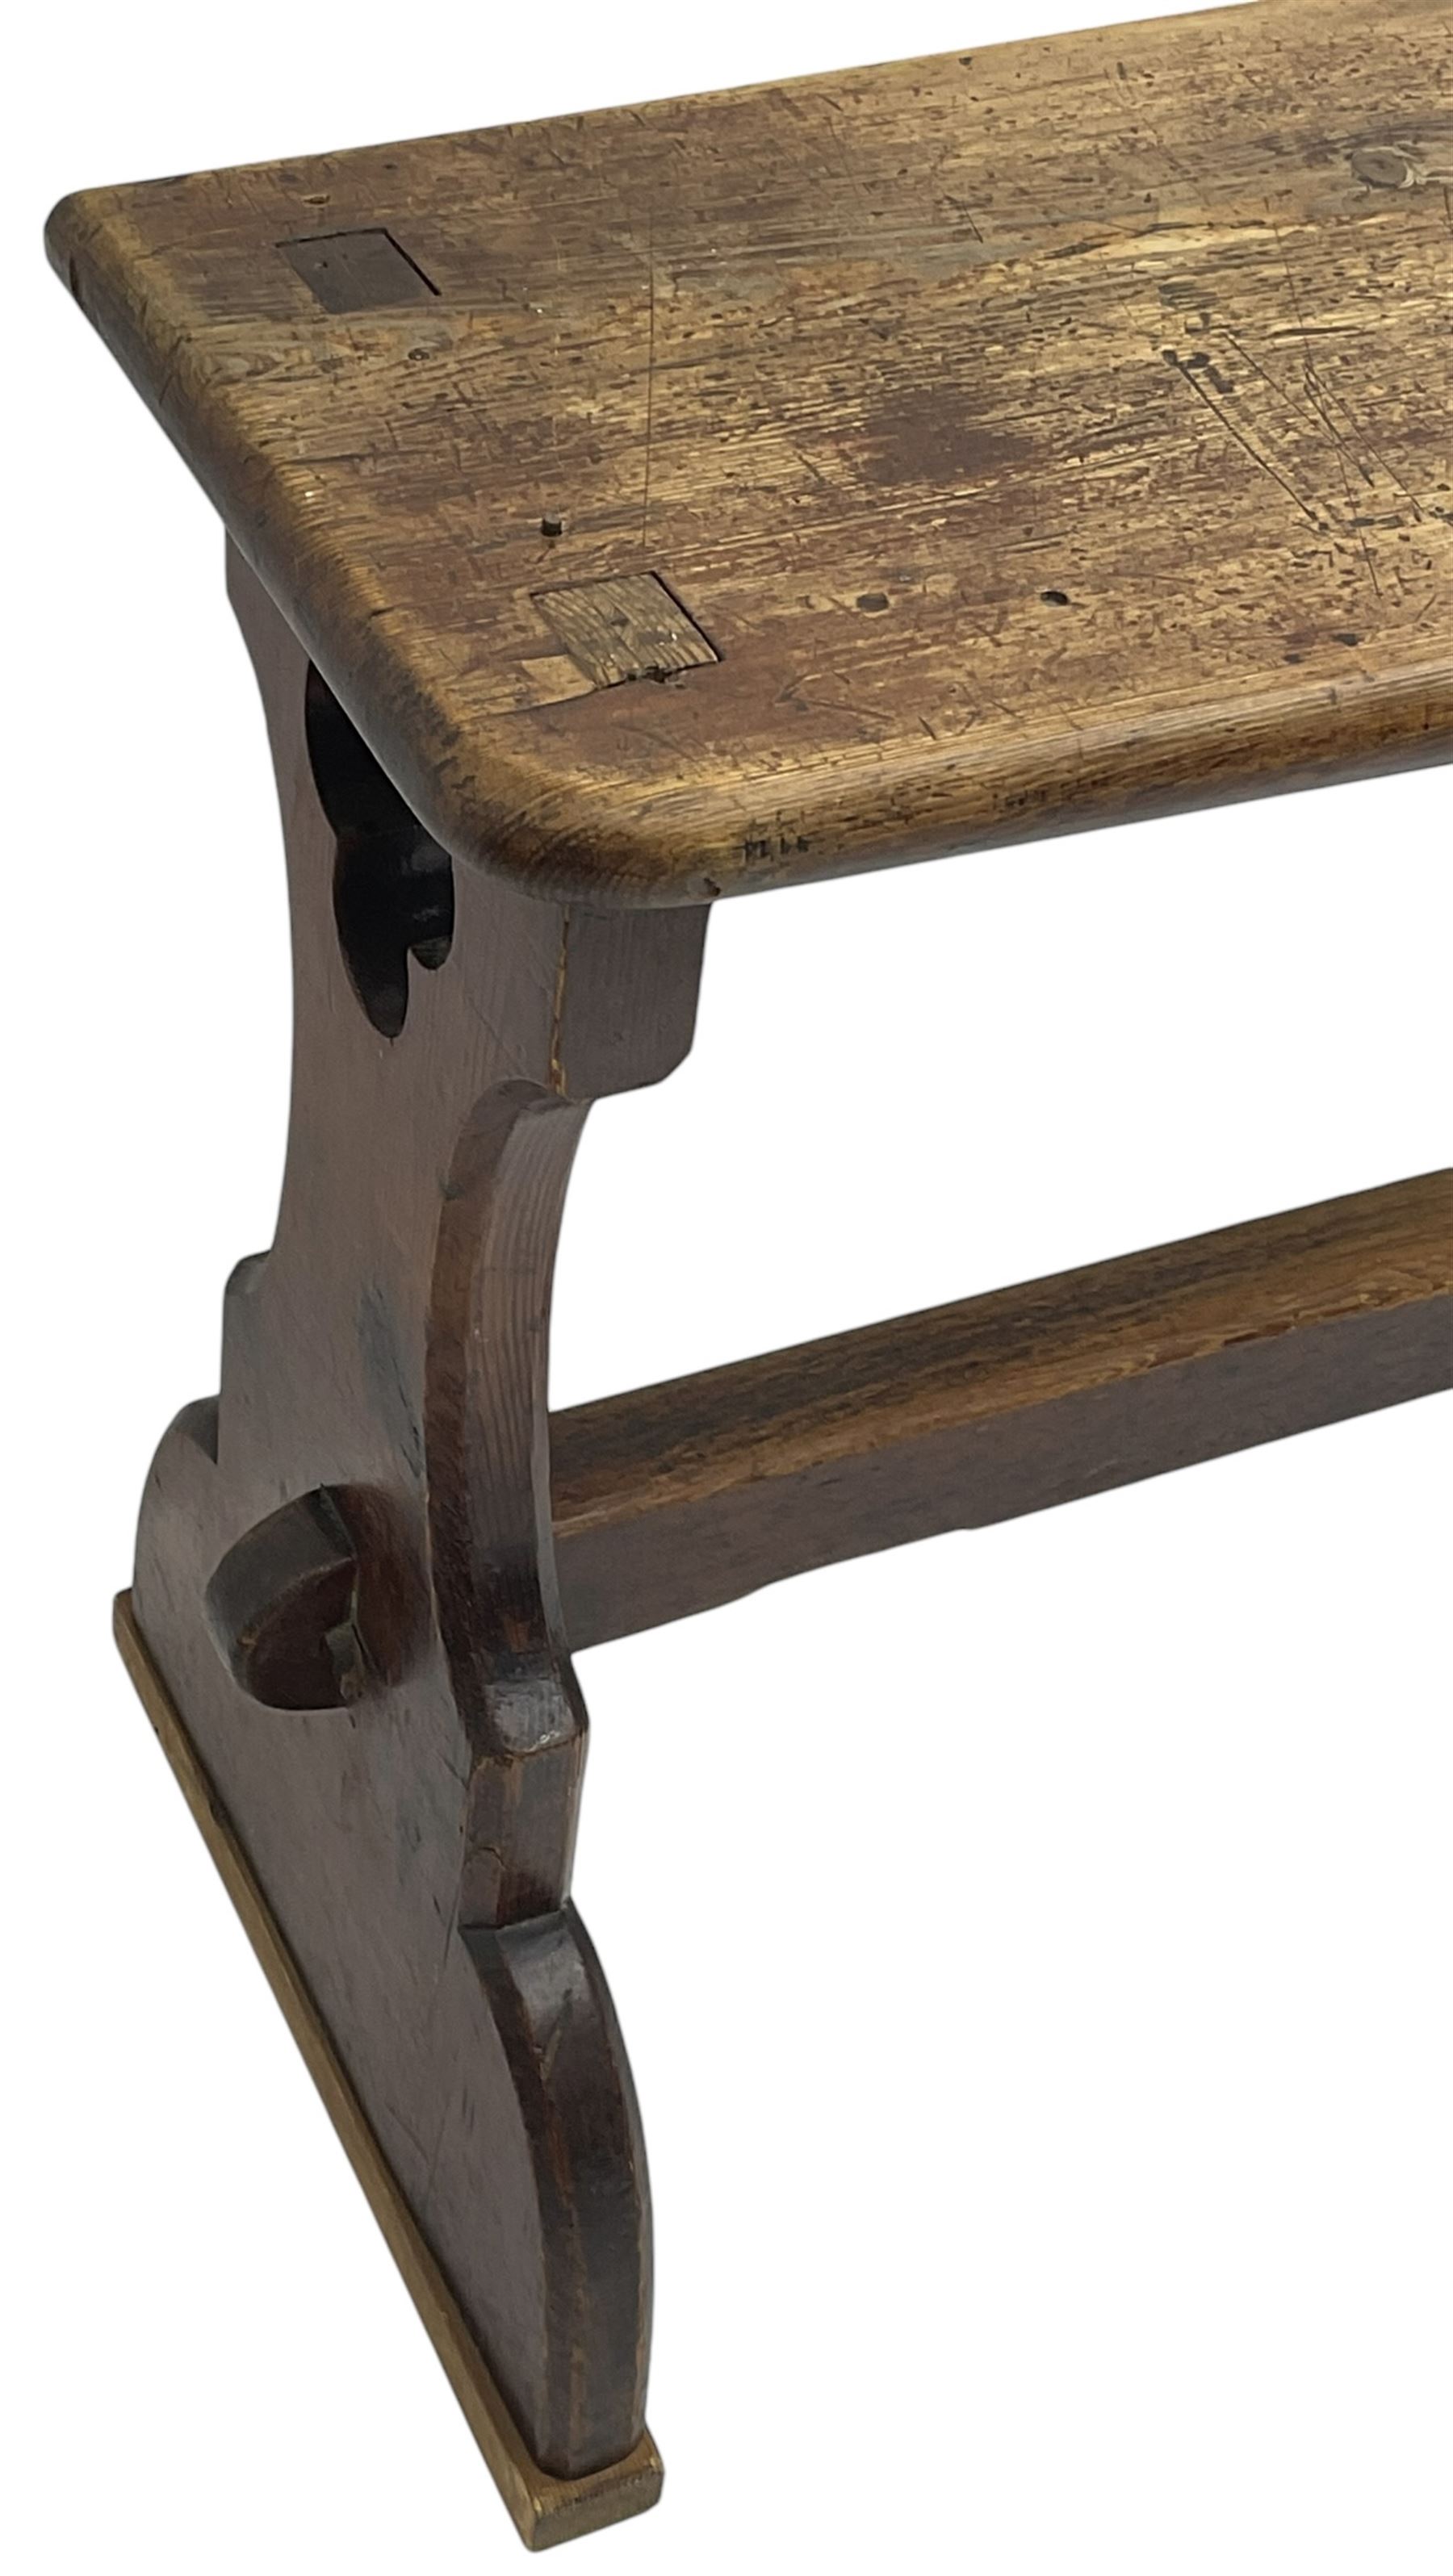 Late Victorian ecclesiastical pitch pine side table - Image 5 of 8